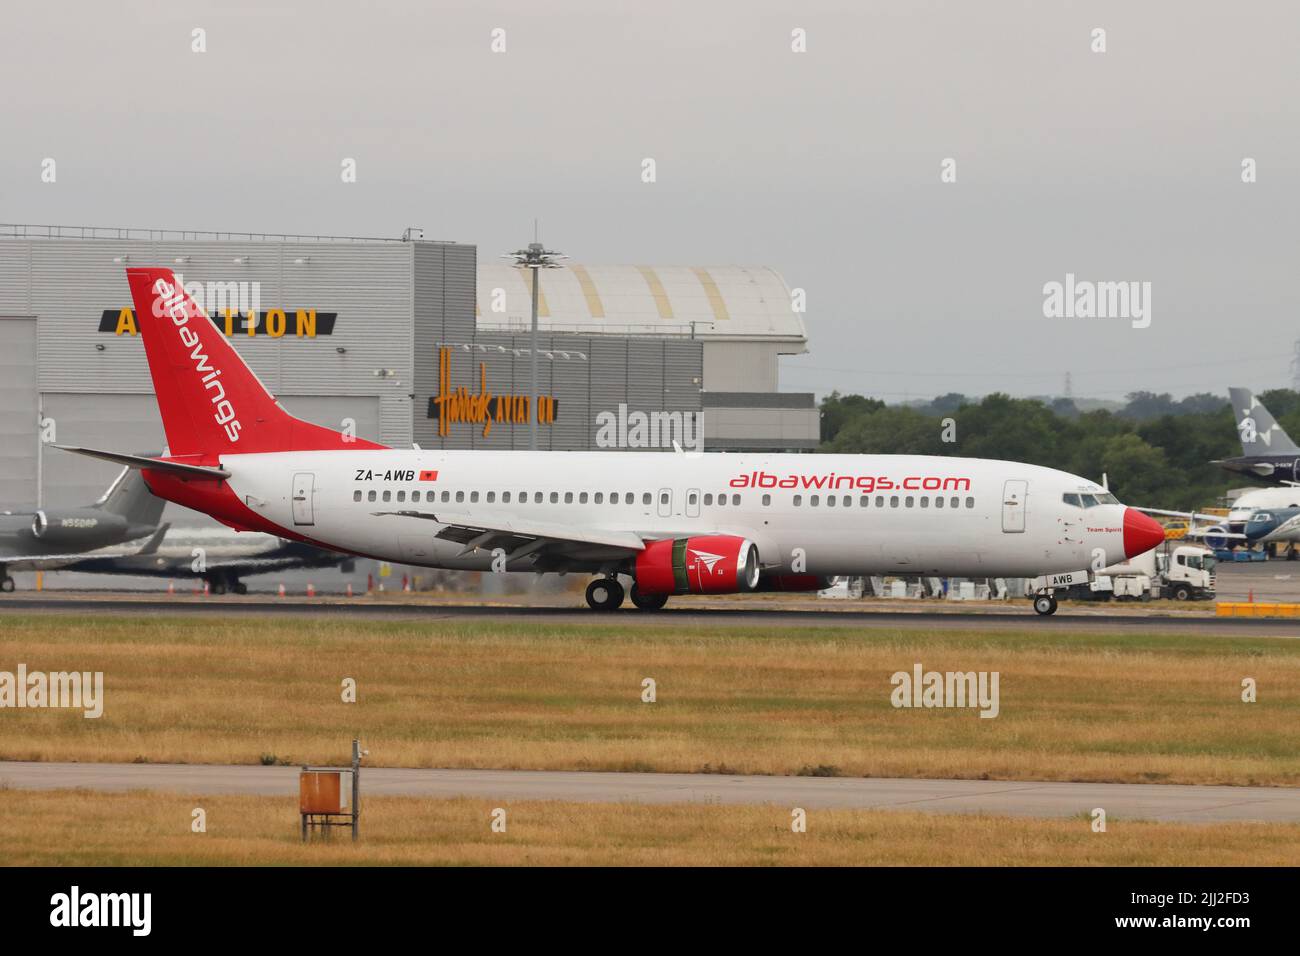 Albawings, Boeing 737 ZA-AWB, arriving at Stansted Airport, Essex, UK Stock Photo